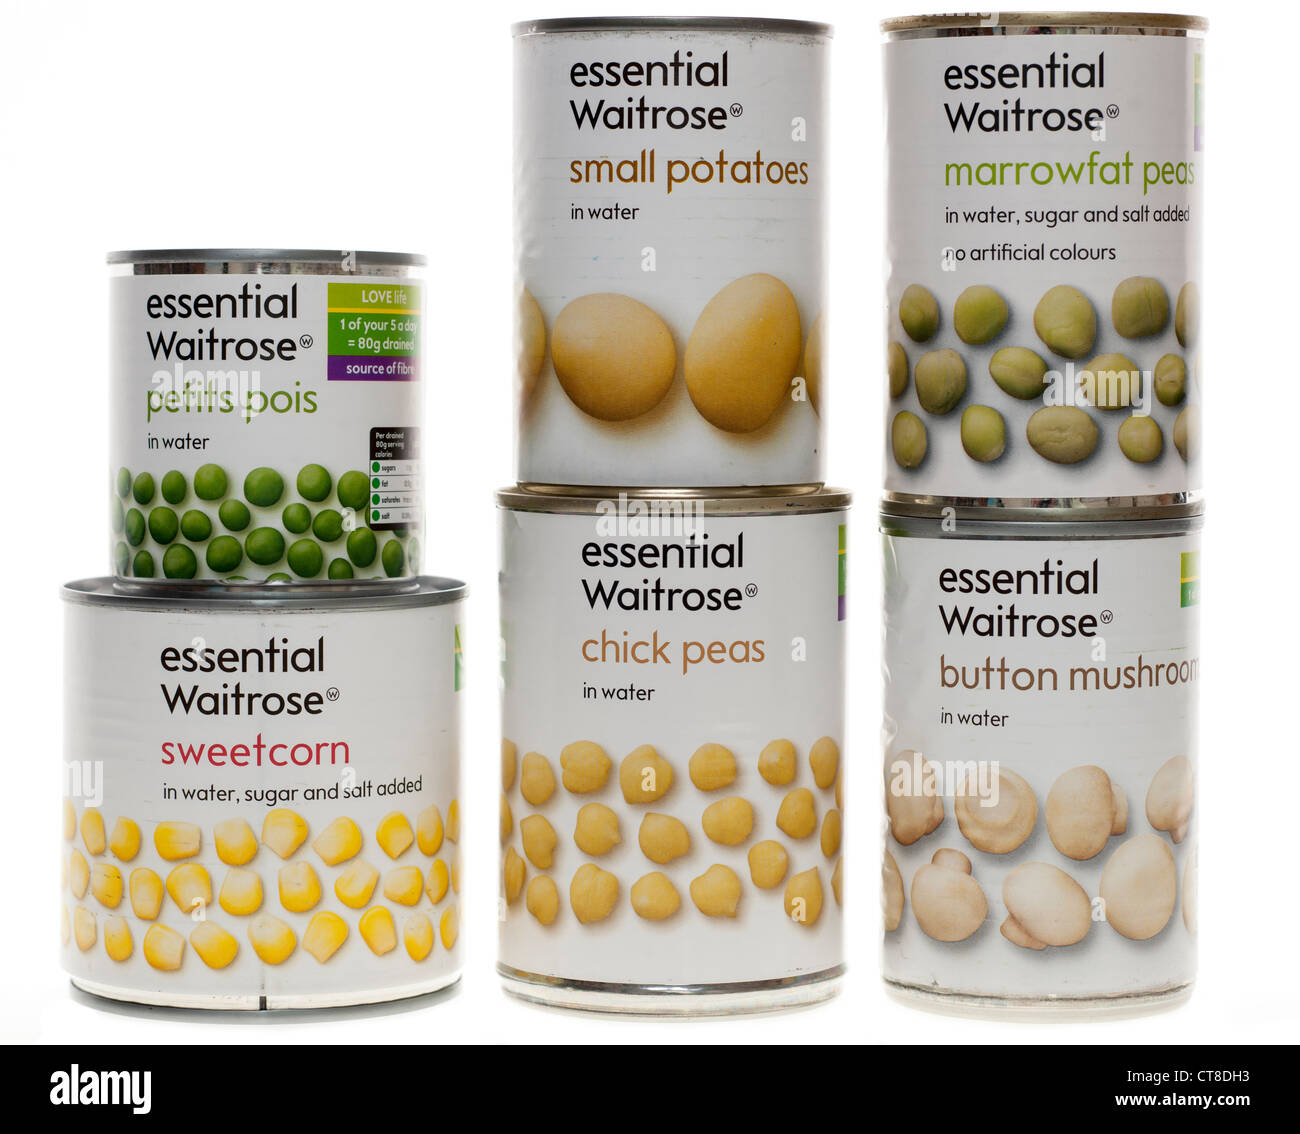 Essential Waitrose products Stock Photo